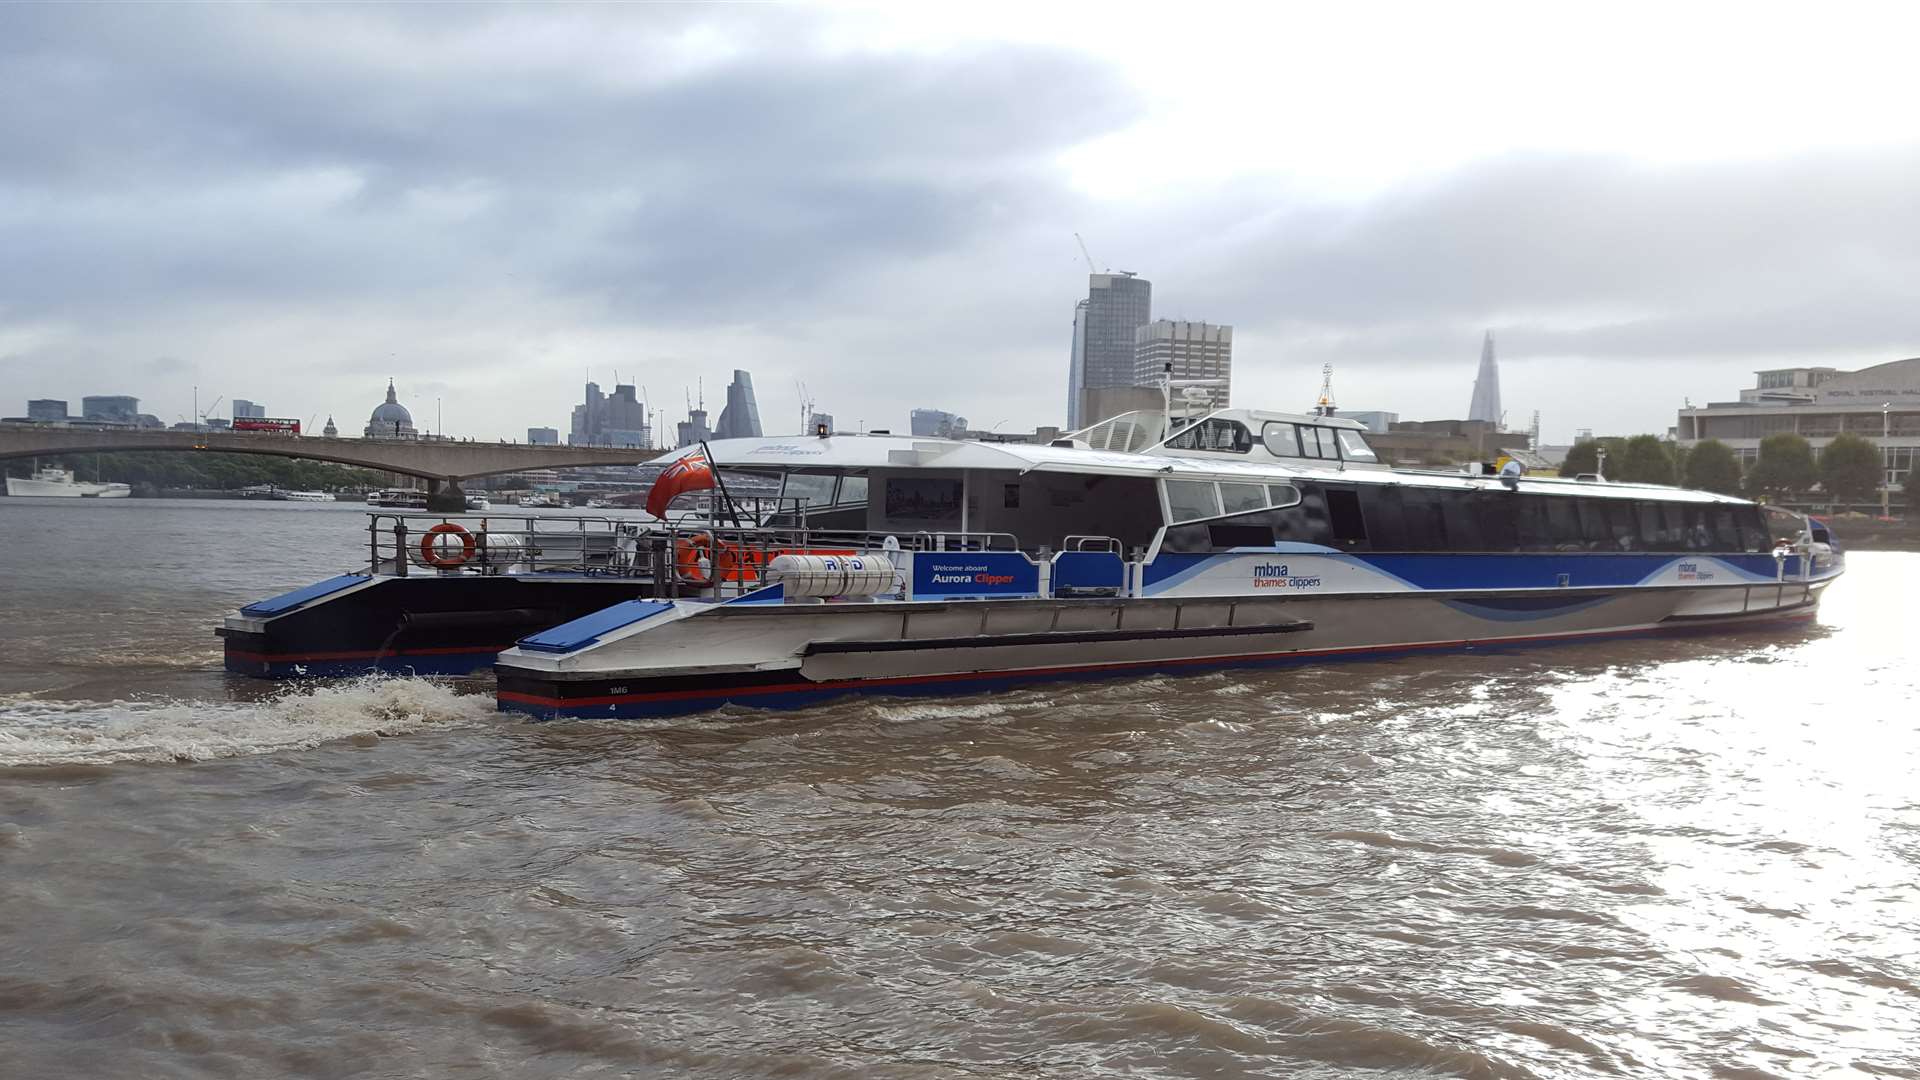 The clipper sails away after dropping its last passengers off in London